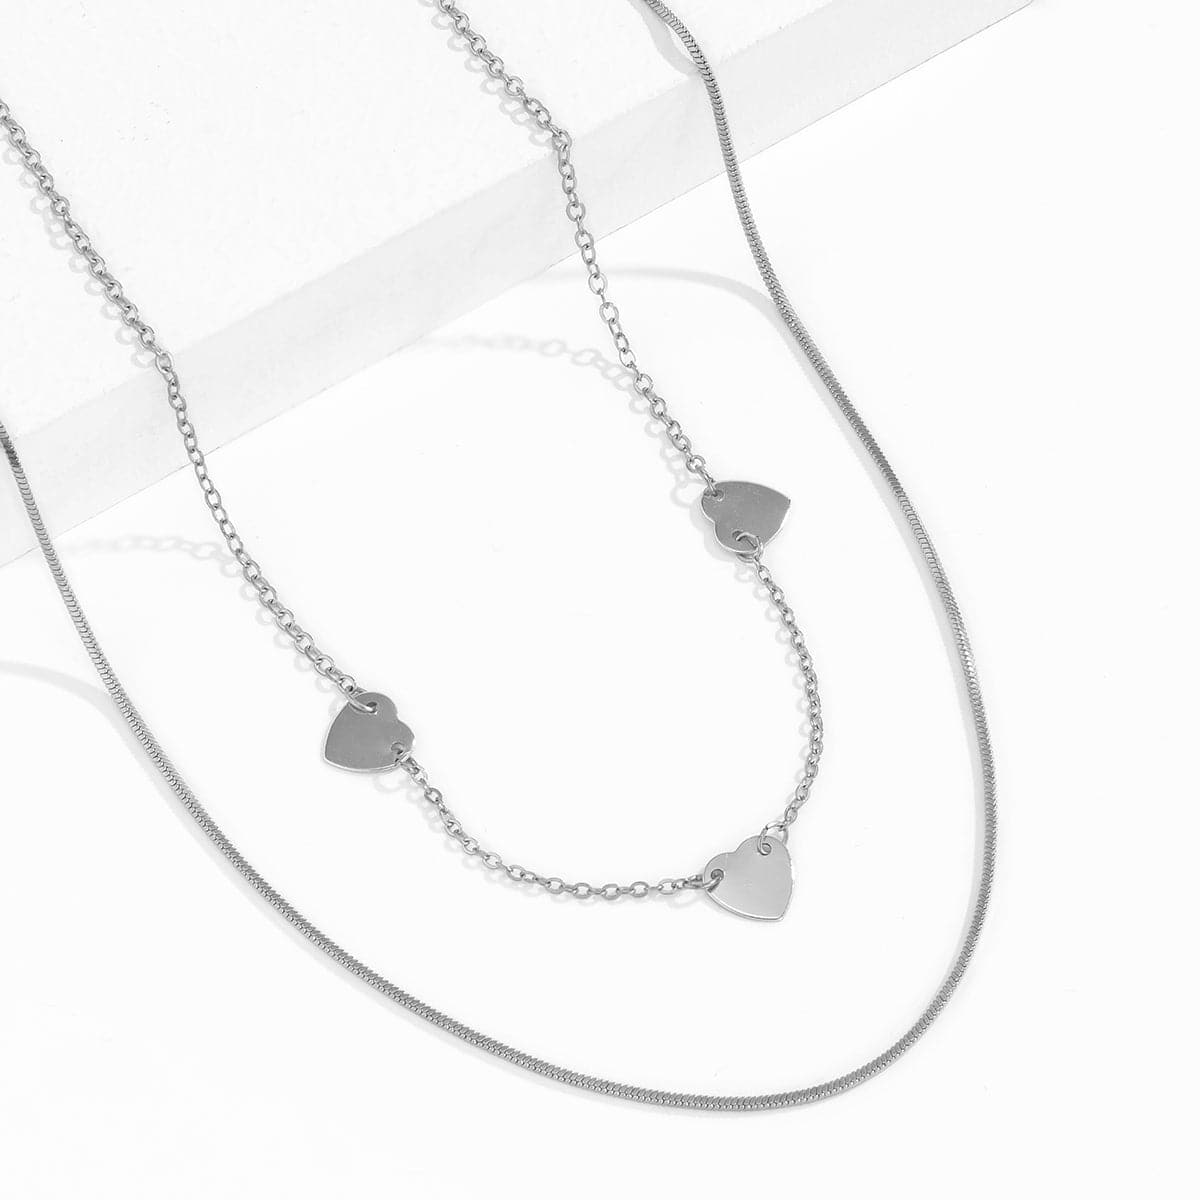 Silver-Plated Heart Sequin Necklace Set